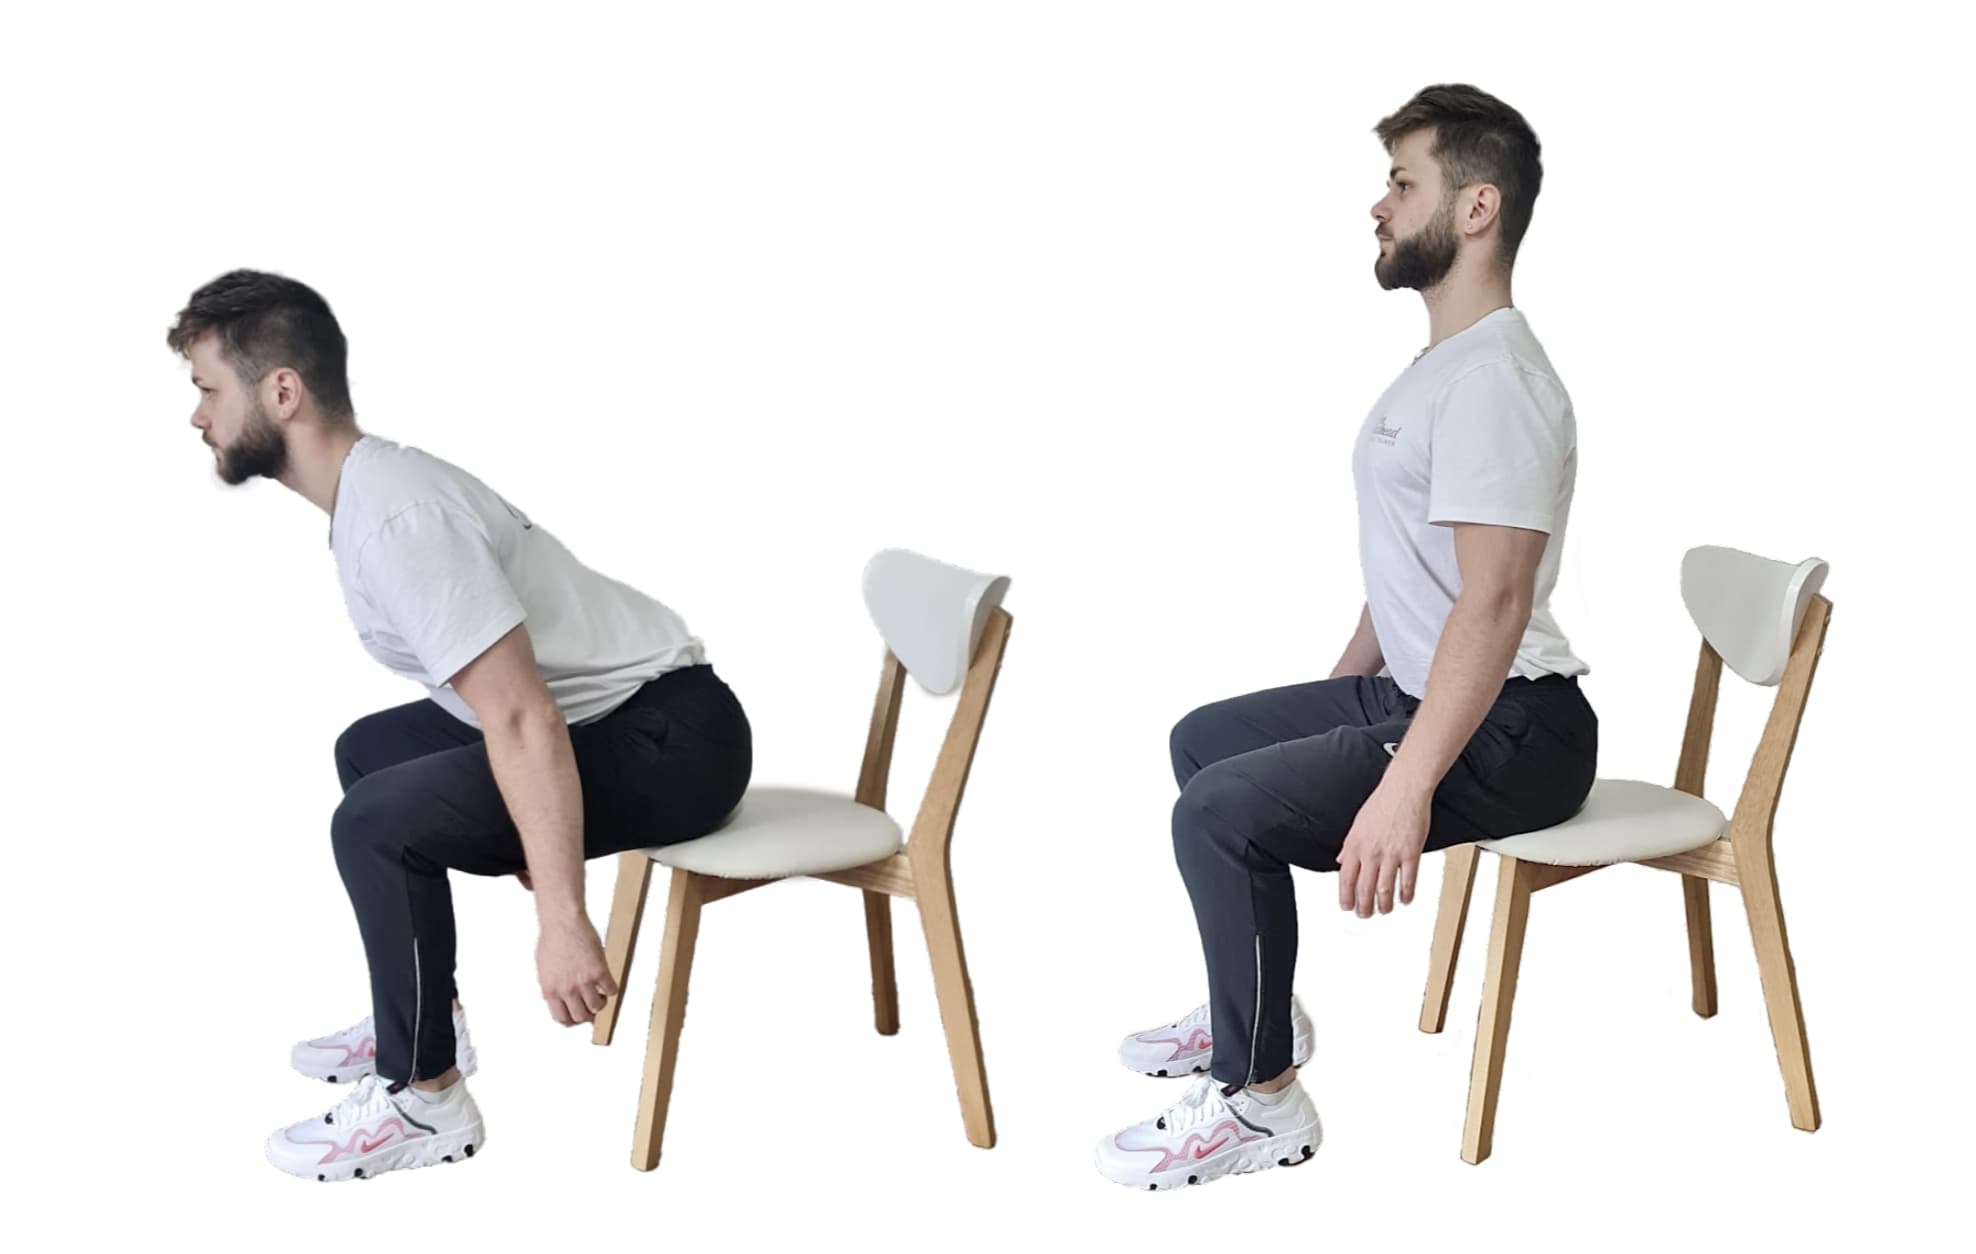 man performing hip hinge exercise on a chair